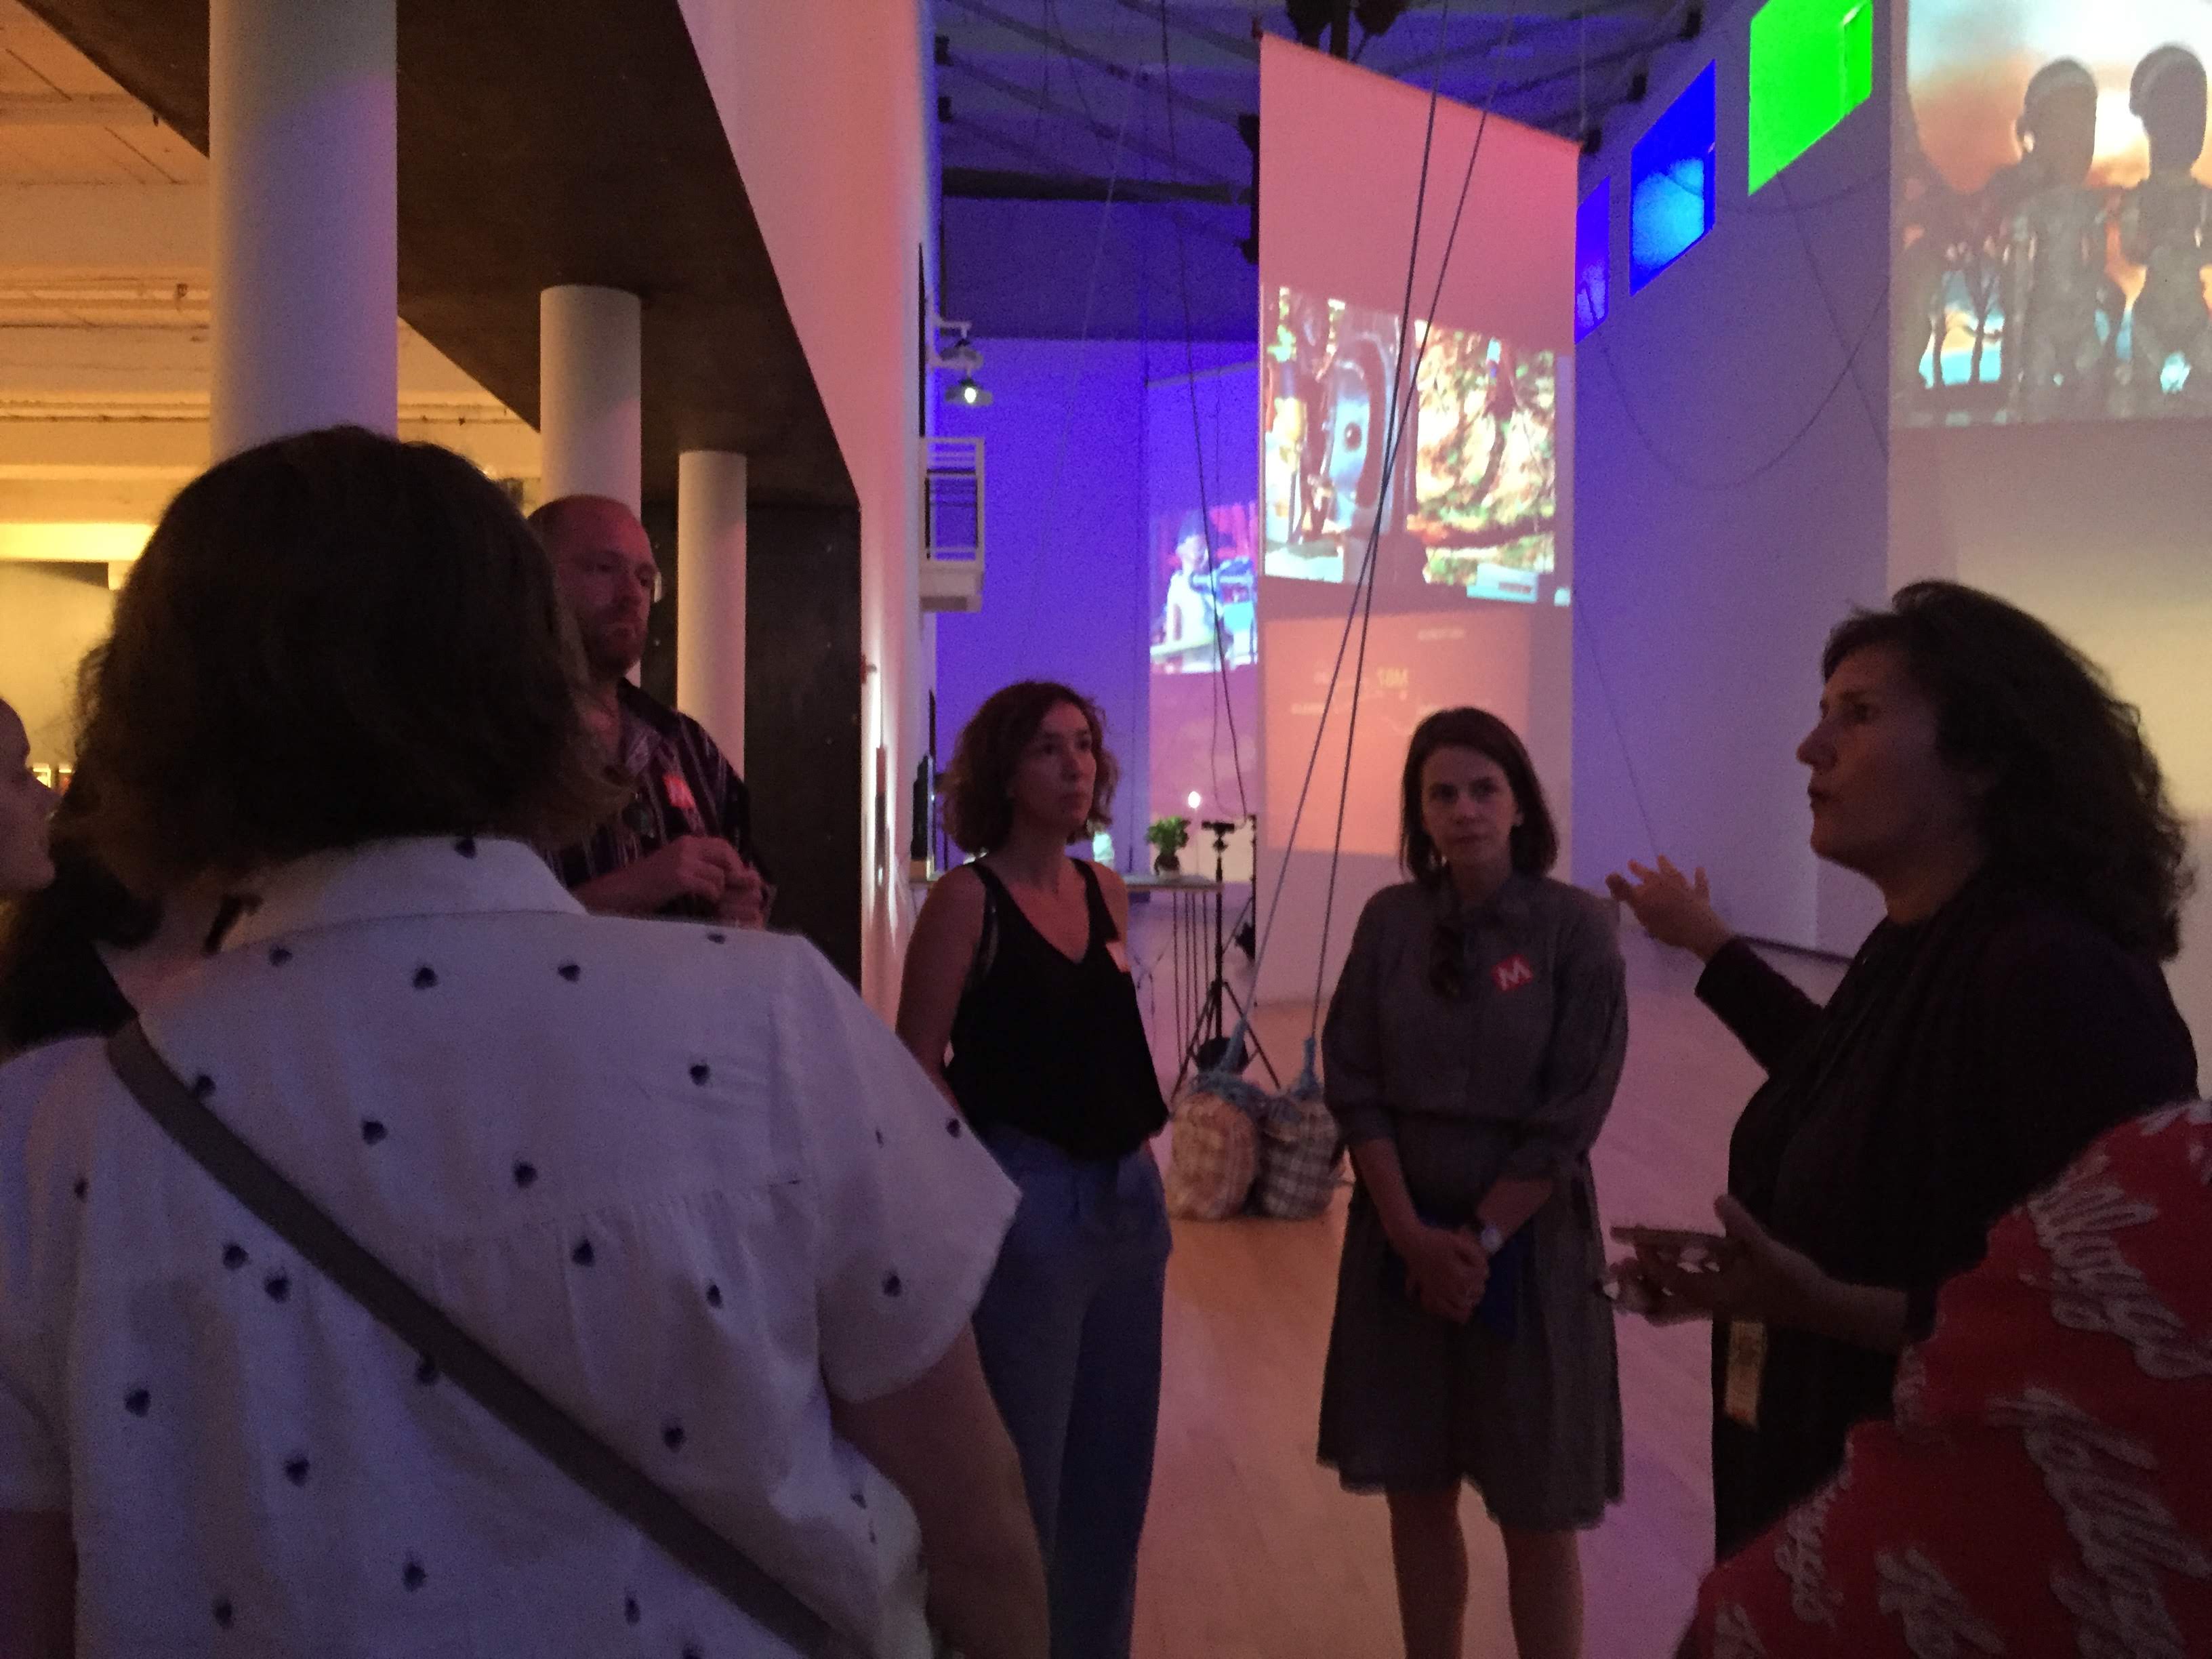 Visiting art organizations in New York State: The curator of MASS MoCA introduced the current exhibition and development of the institution.